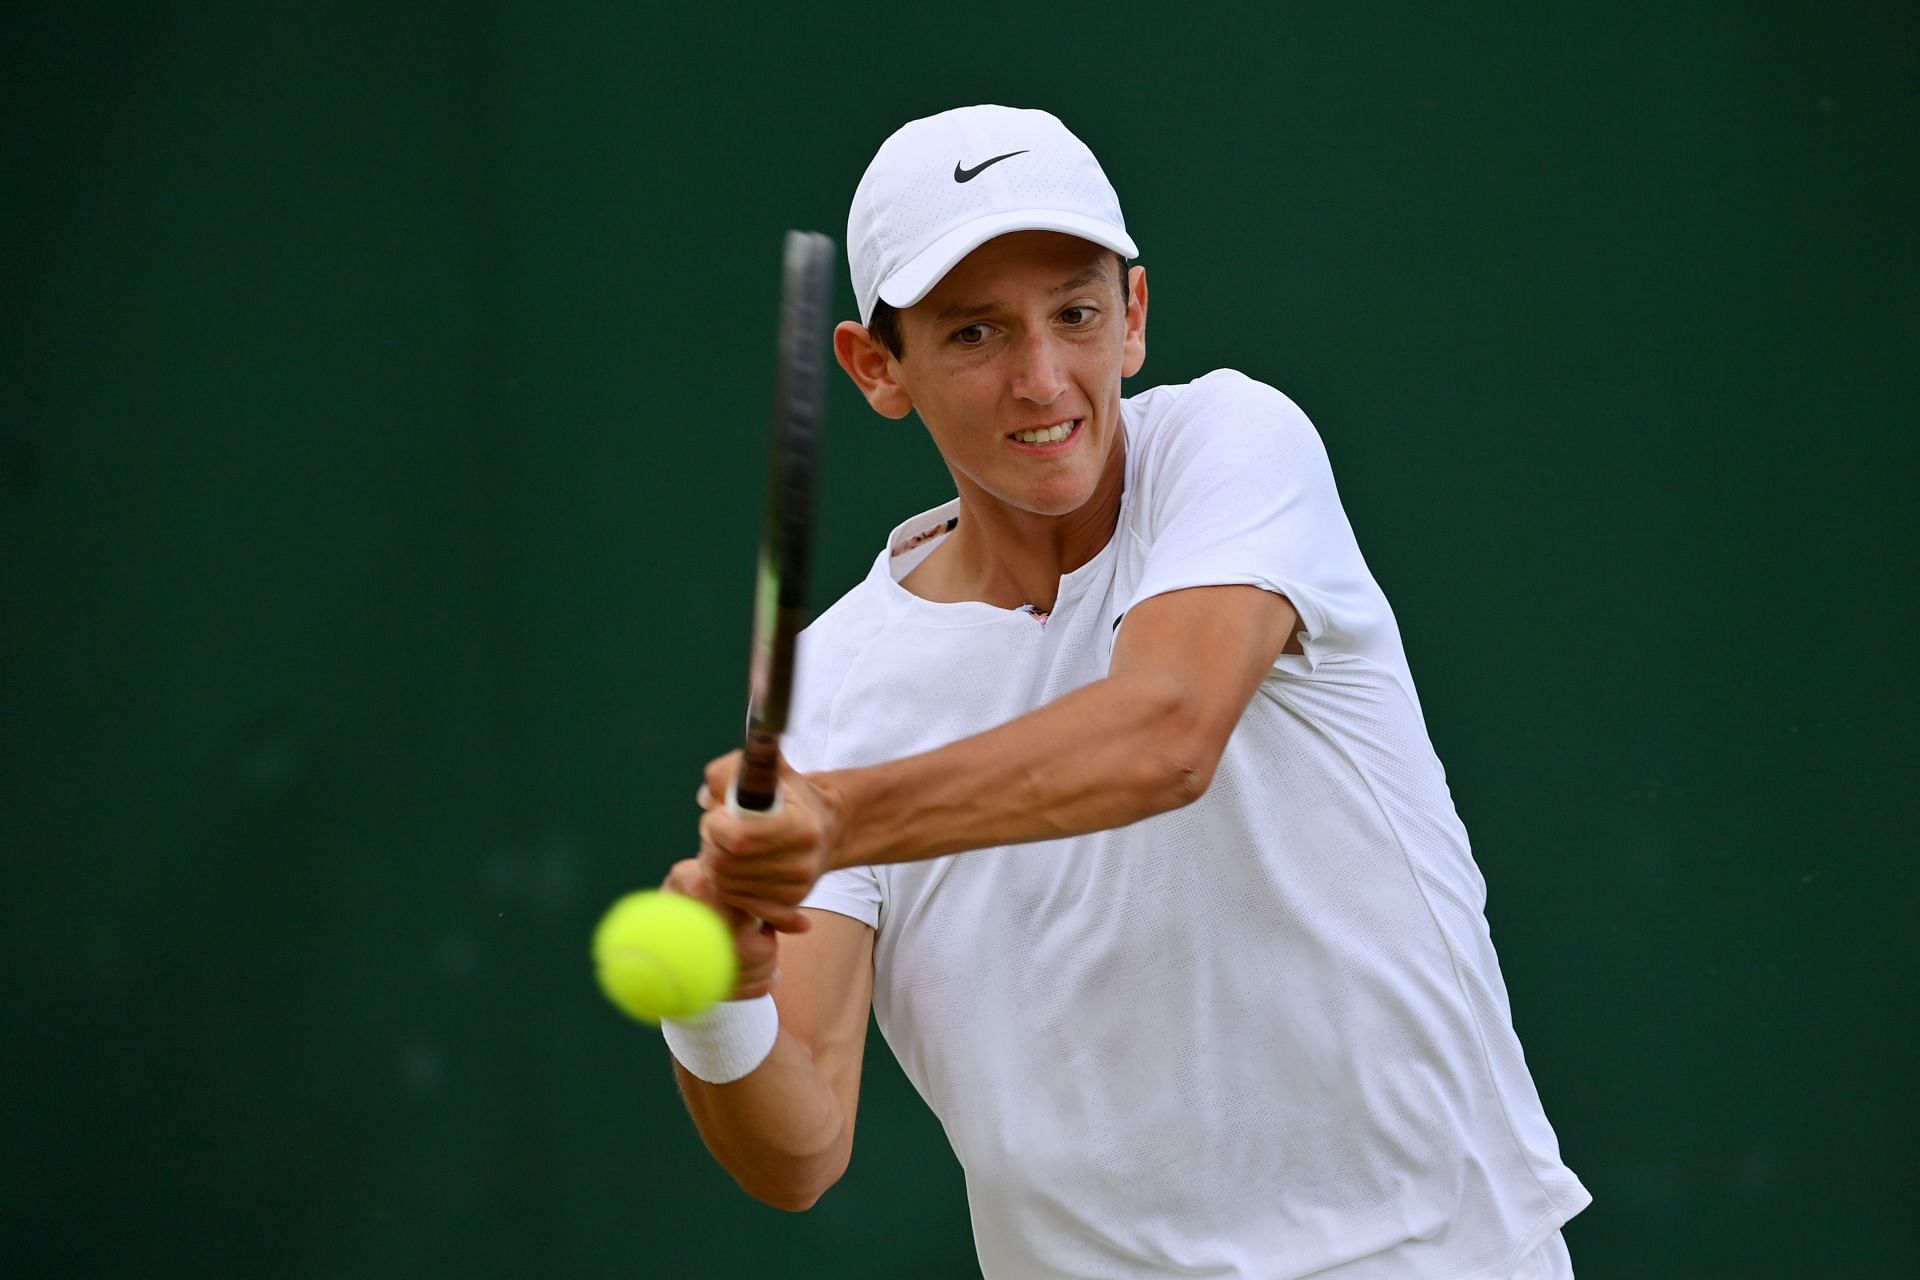 Nicholas Godsick will be in action at Flushing Meadows this week.